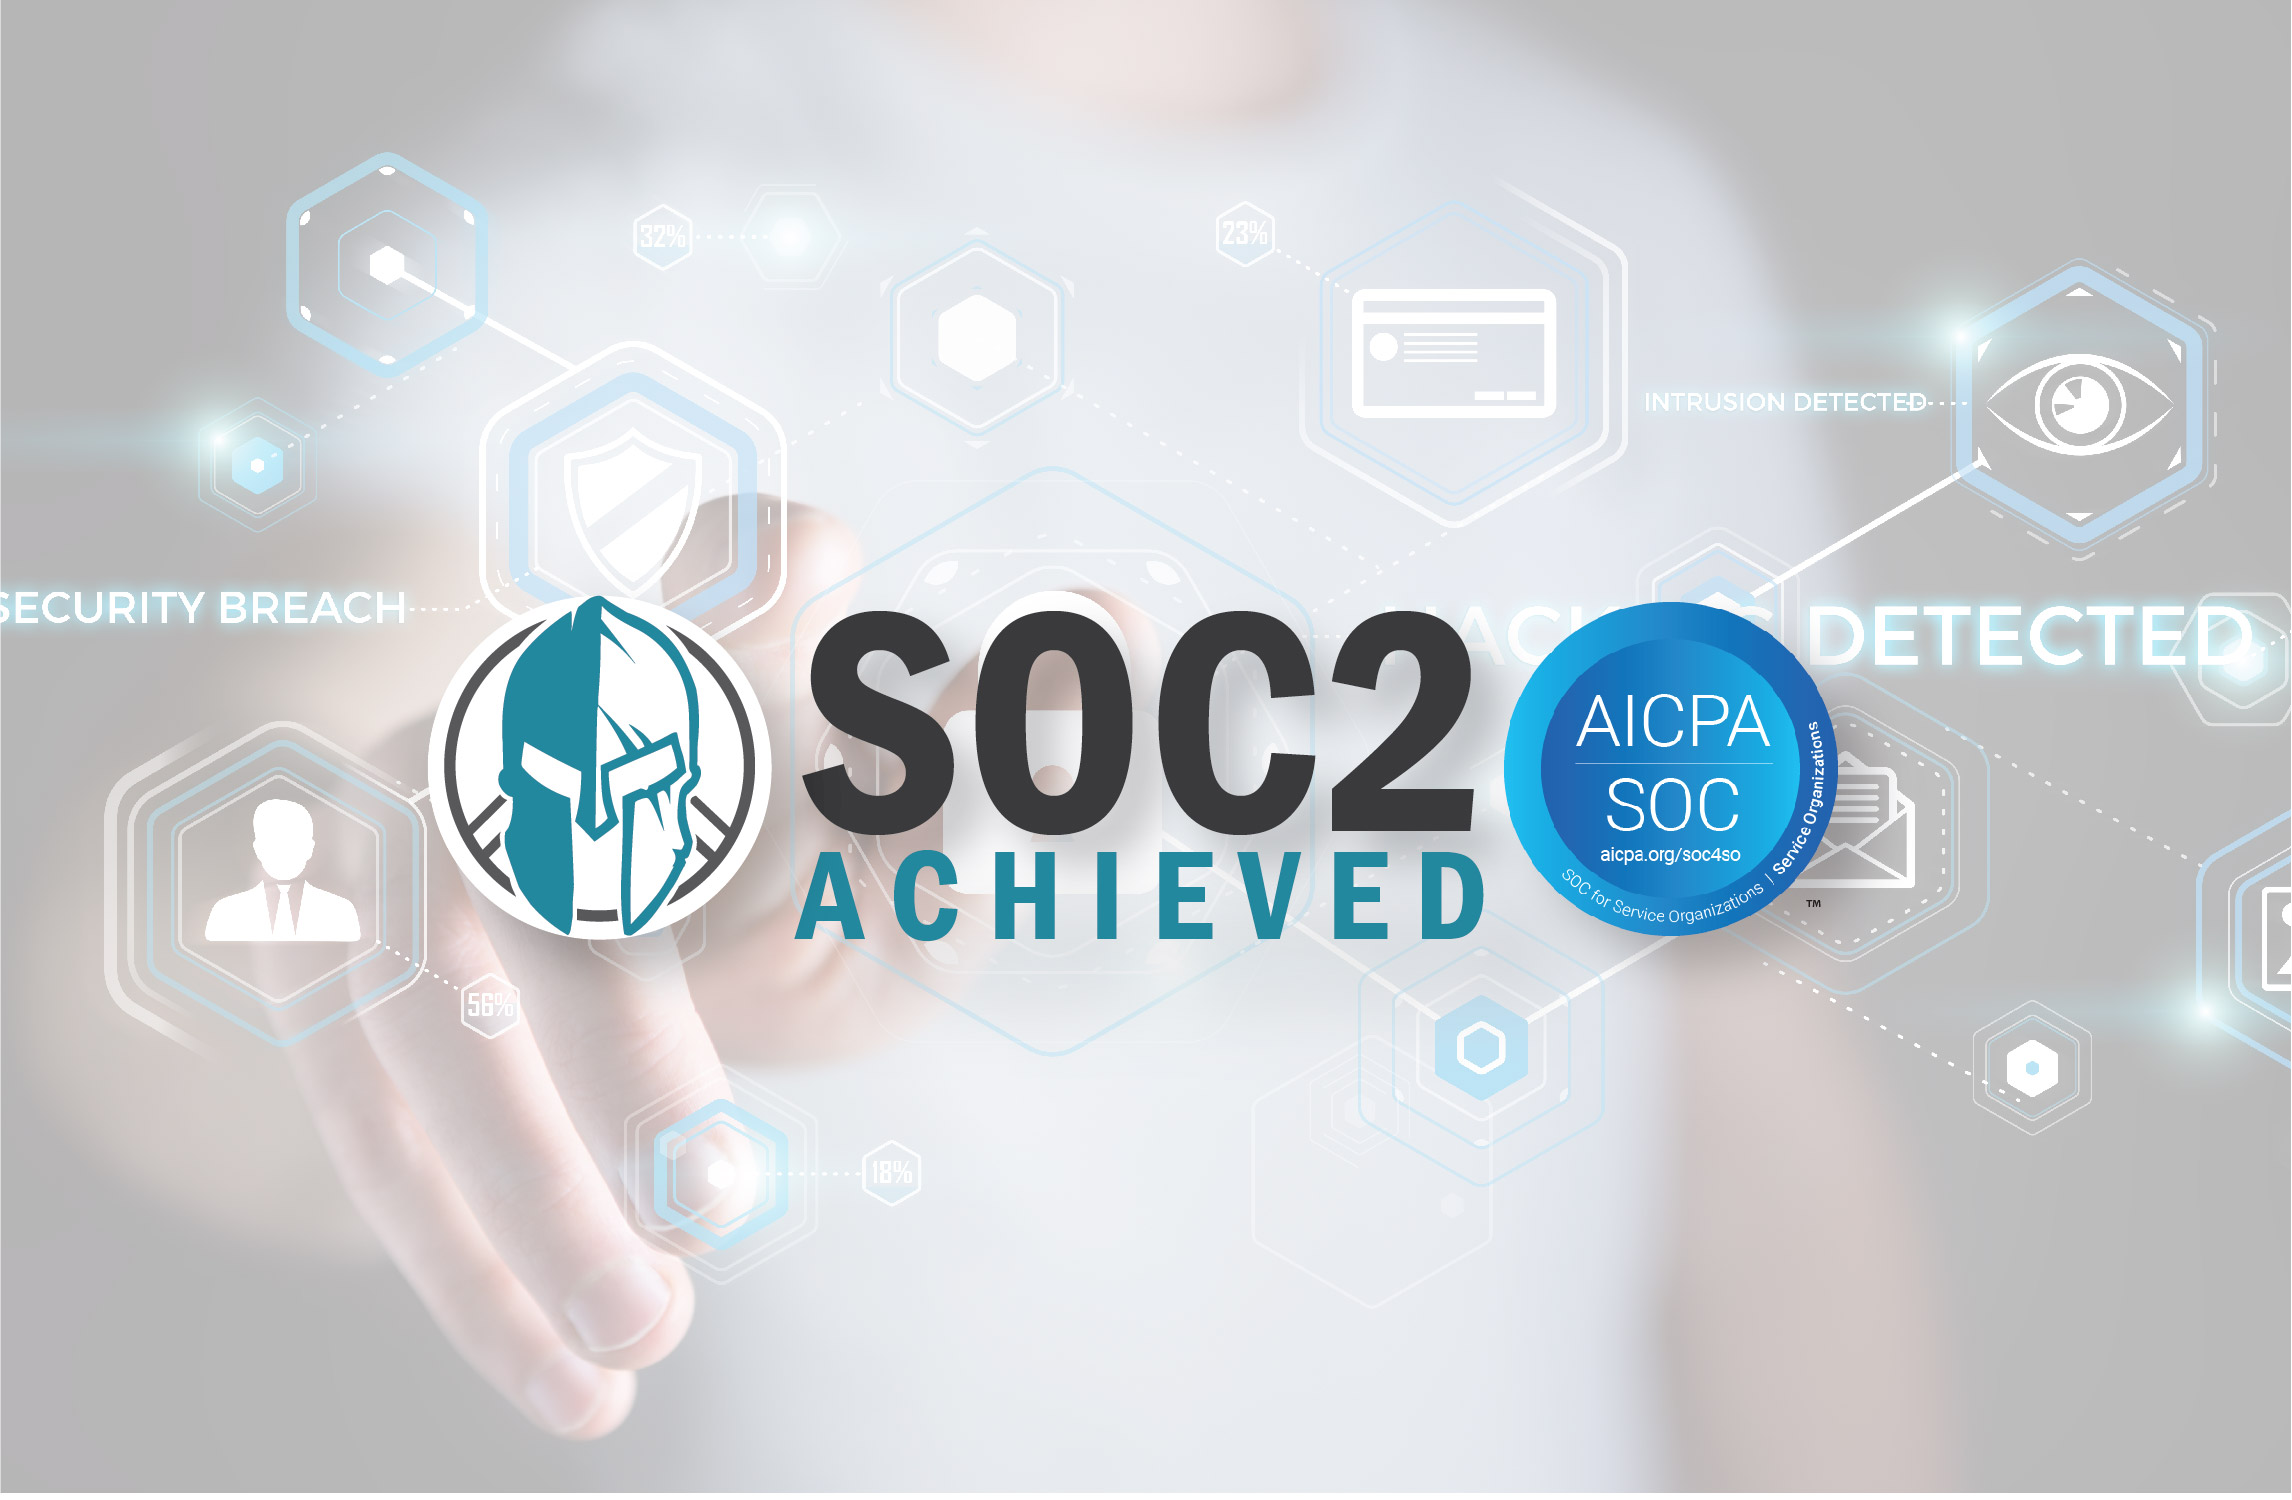 InfusionPoints achieves a SOC2 Type I from the AICPA